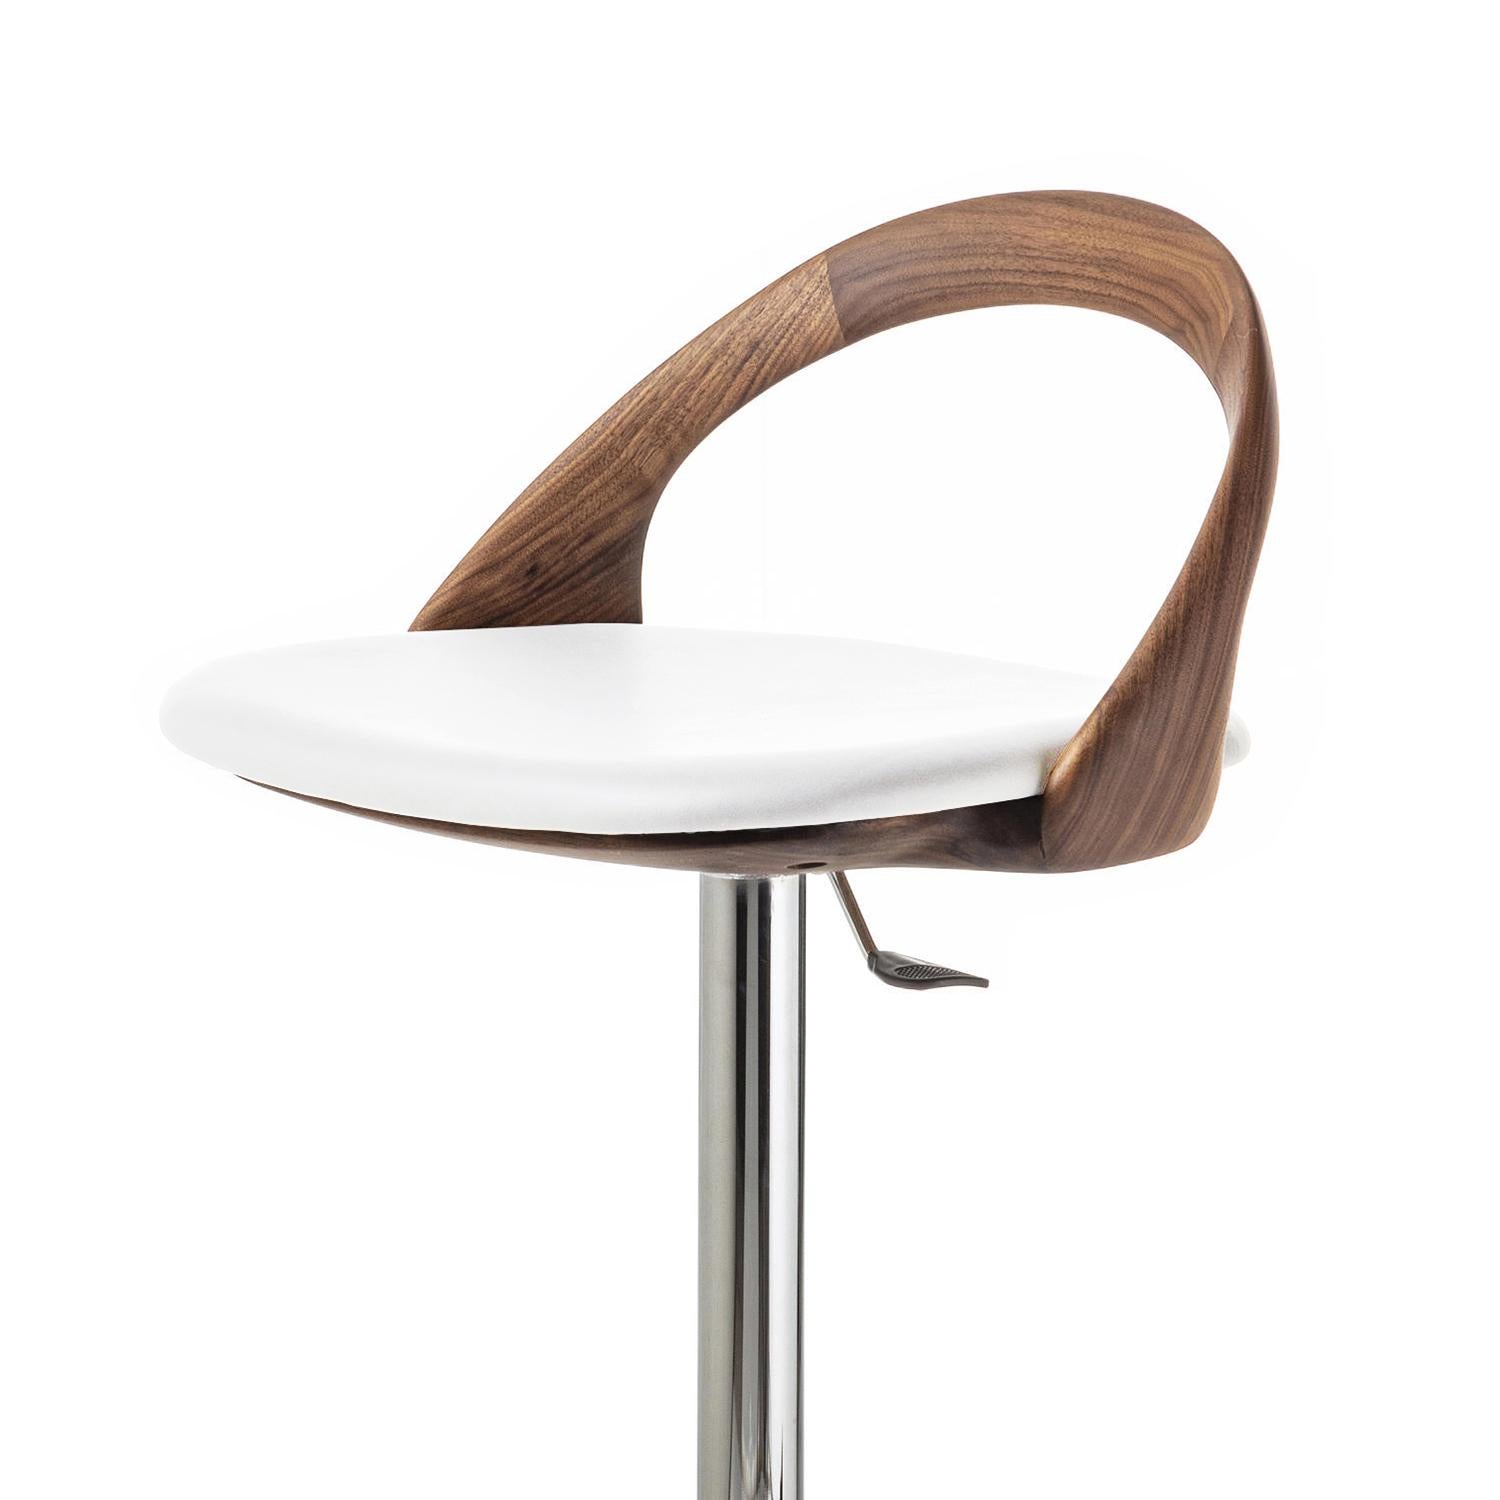 Bar Stool Tonny with steel structure in polished finish,
swivel stool with solid walnut wood under seat and backrest, 
upholstered and covered with genuine italian leather in white color.
Swivel bar stool, Measures: adjustable height 74cm to